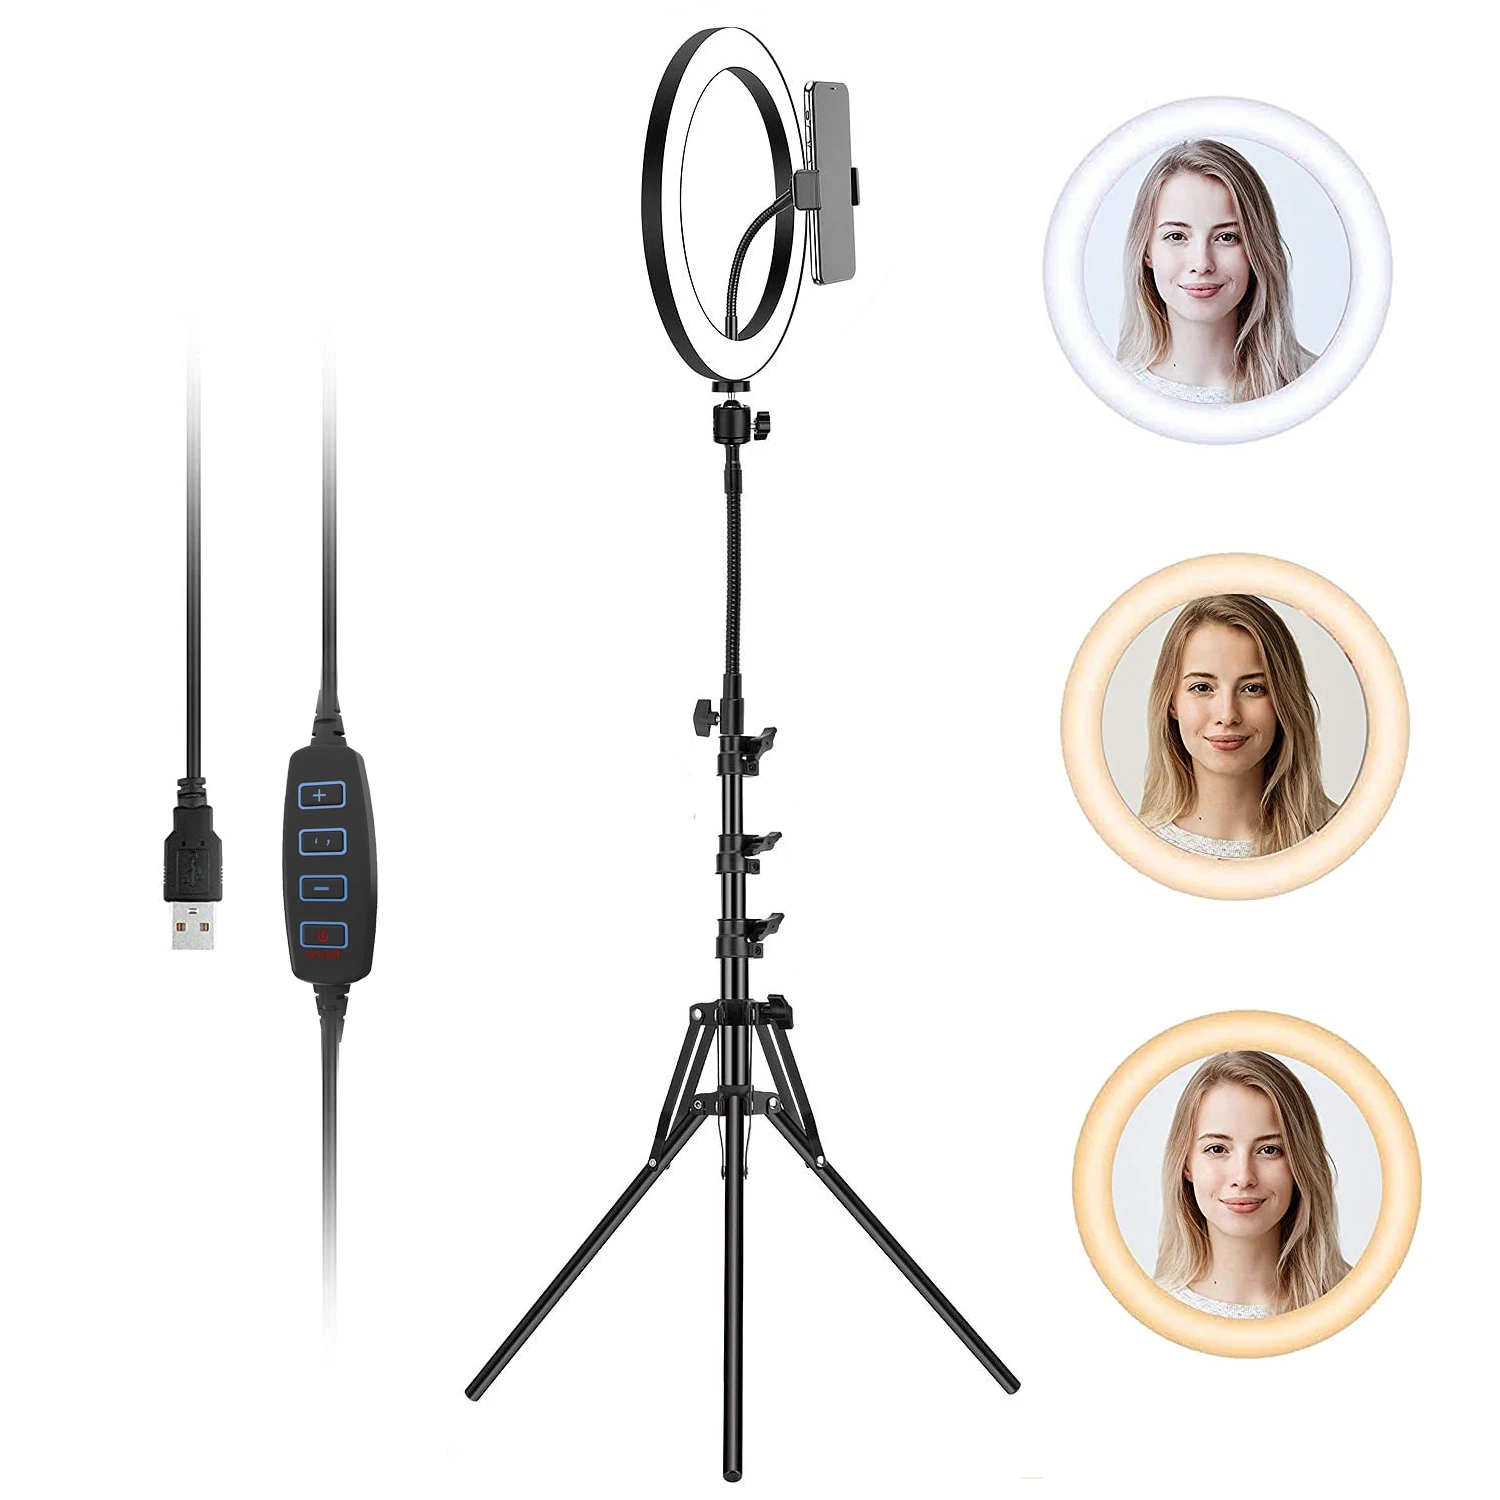 

Amazon Hot Sale LED cell phone Fill in Portable Universal girl make up Selfie Light Flash Lamp New arrival For Smart Phone Self, Black